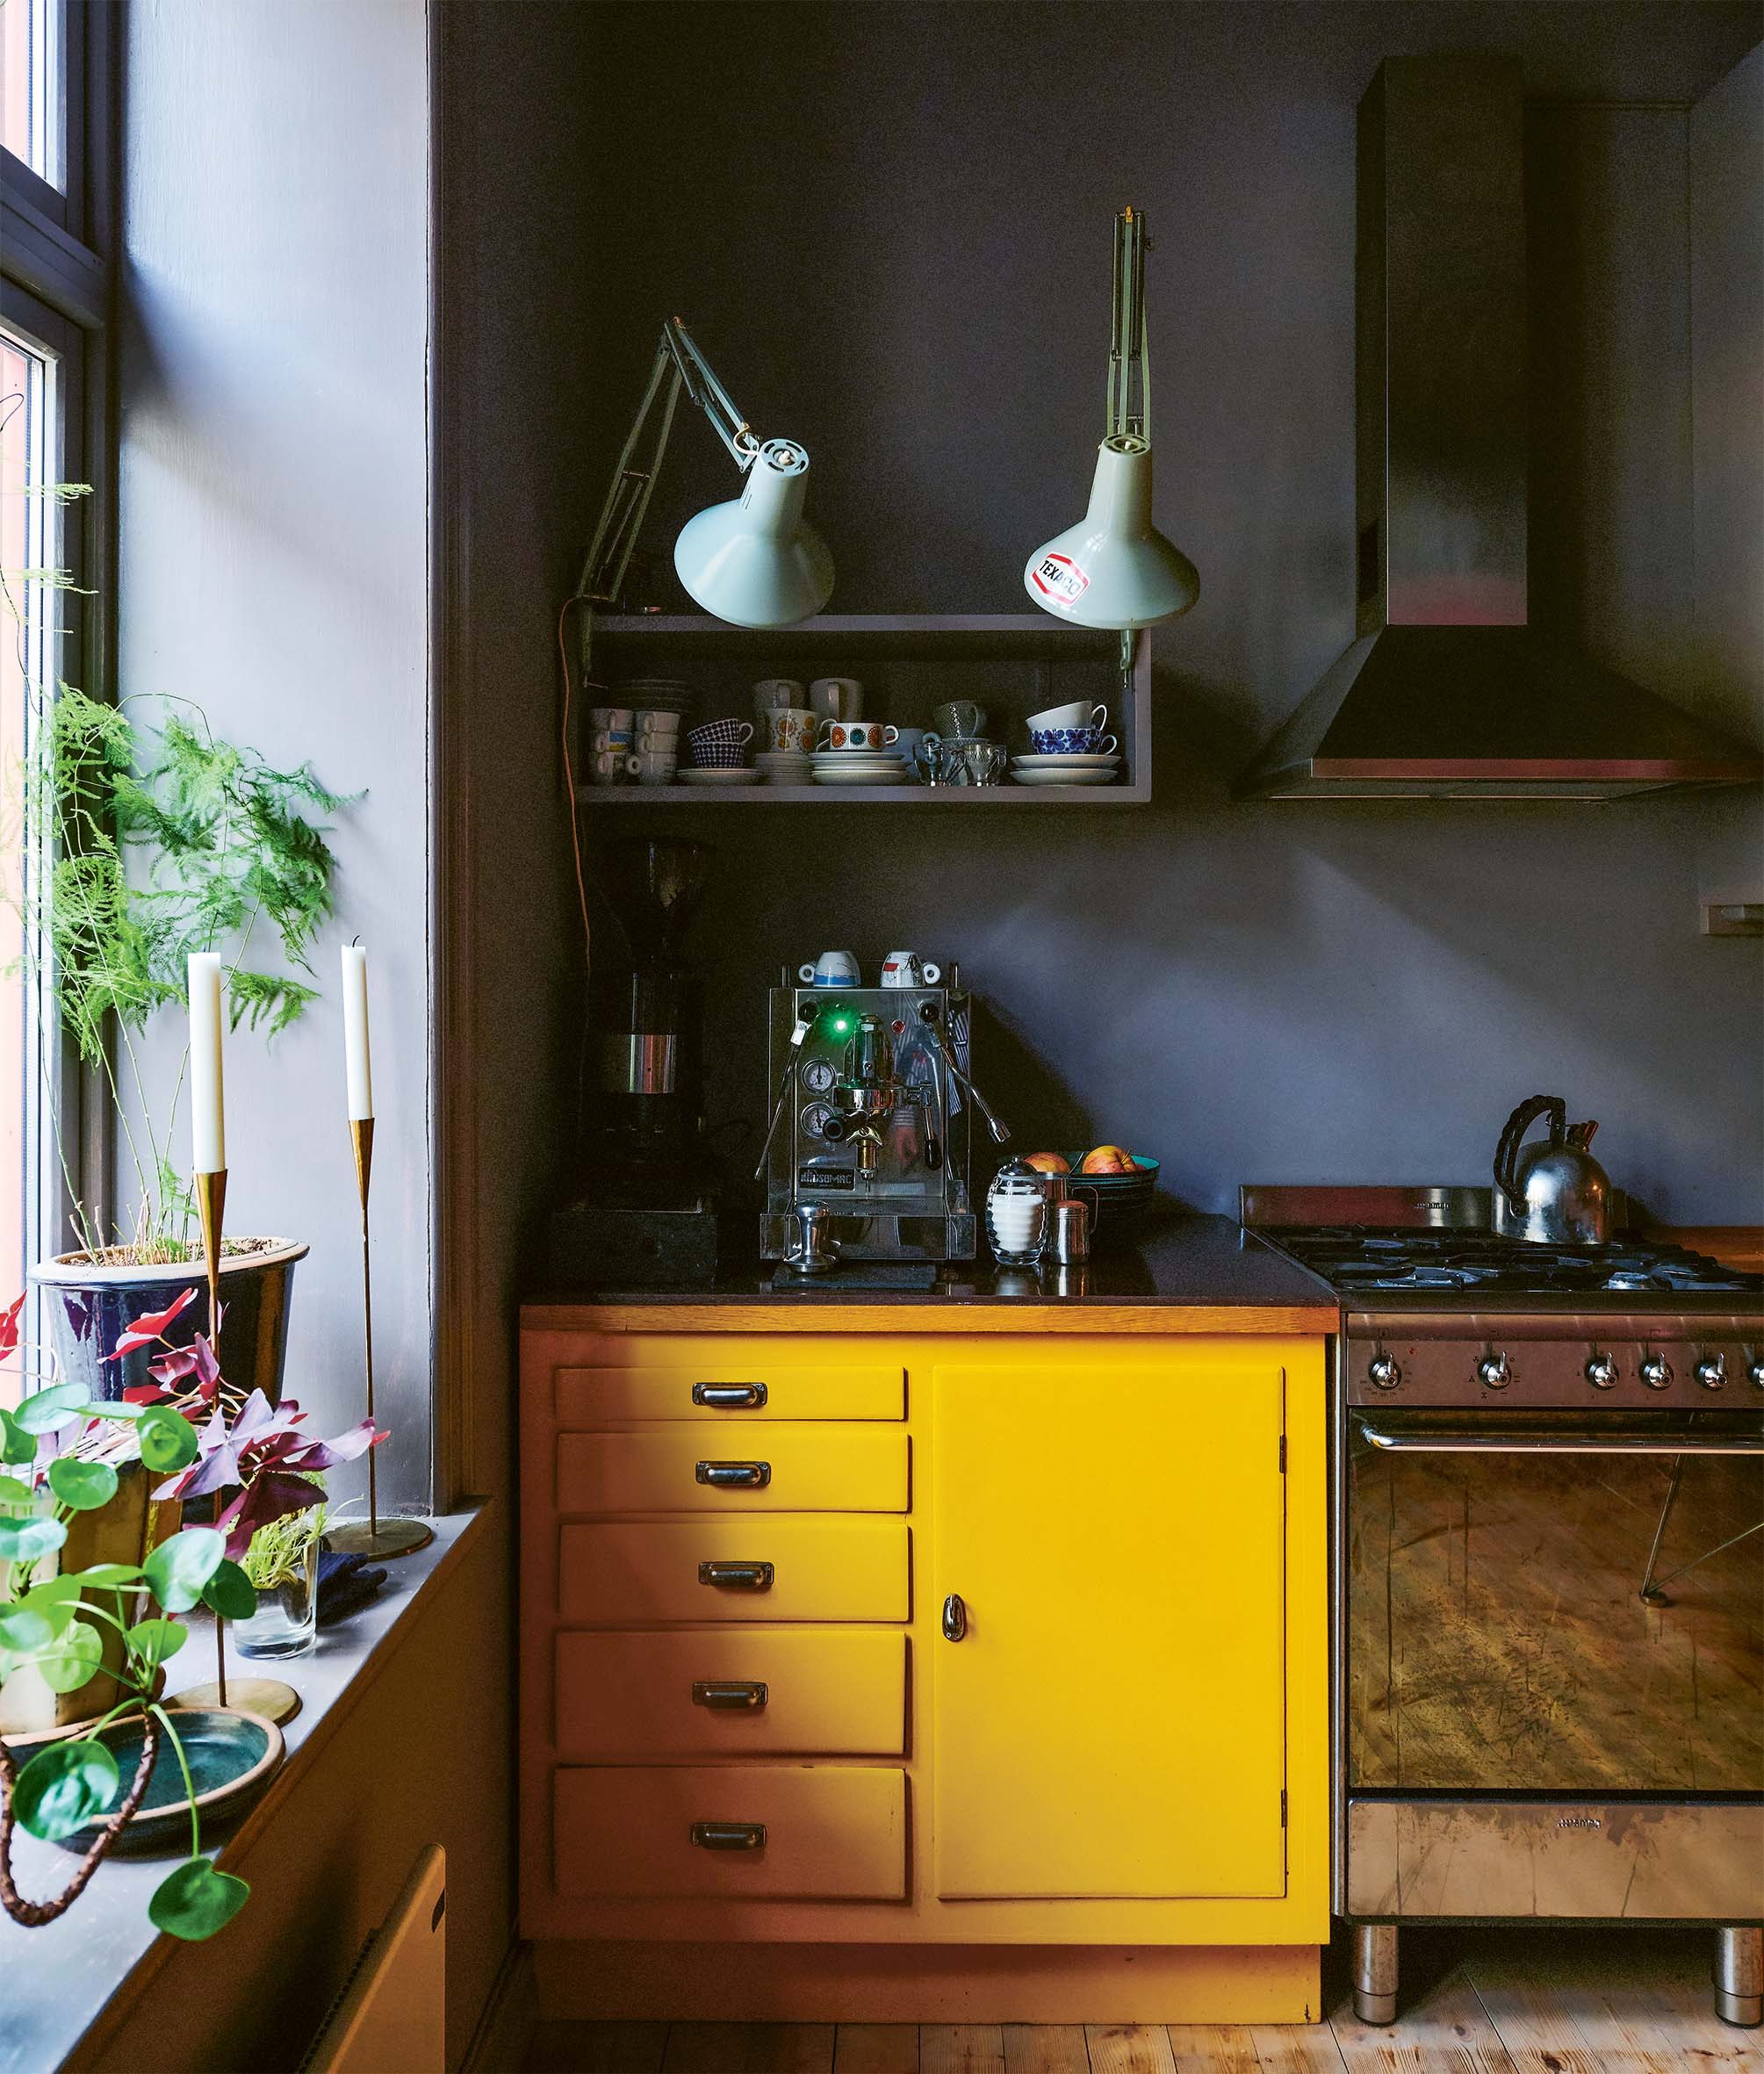 Kitchen with black walls, yellow cabinet and plants on windowsill